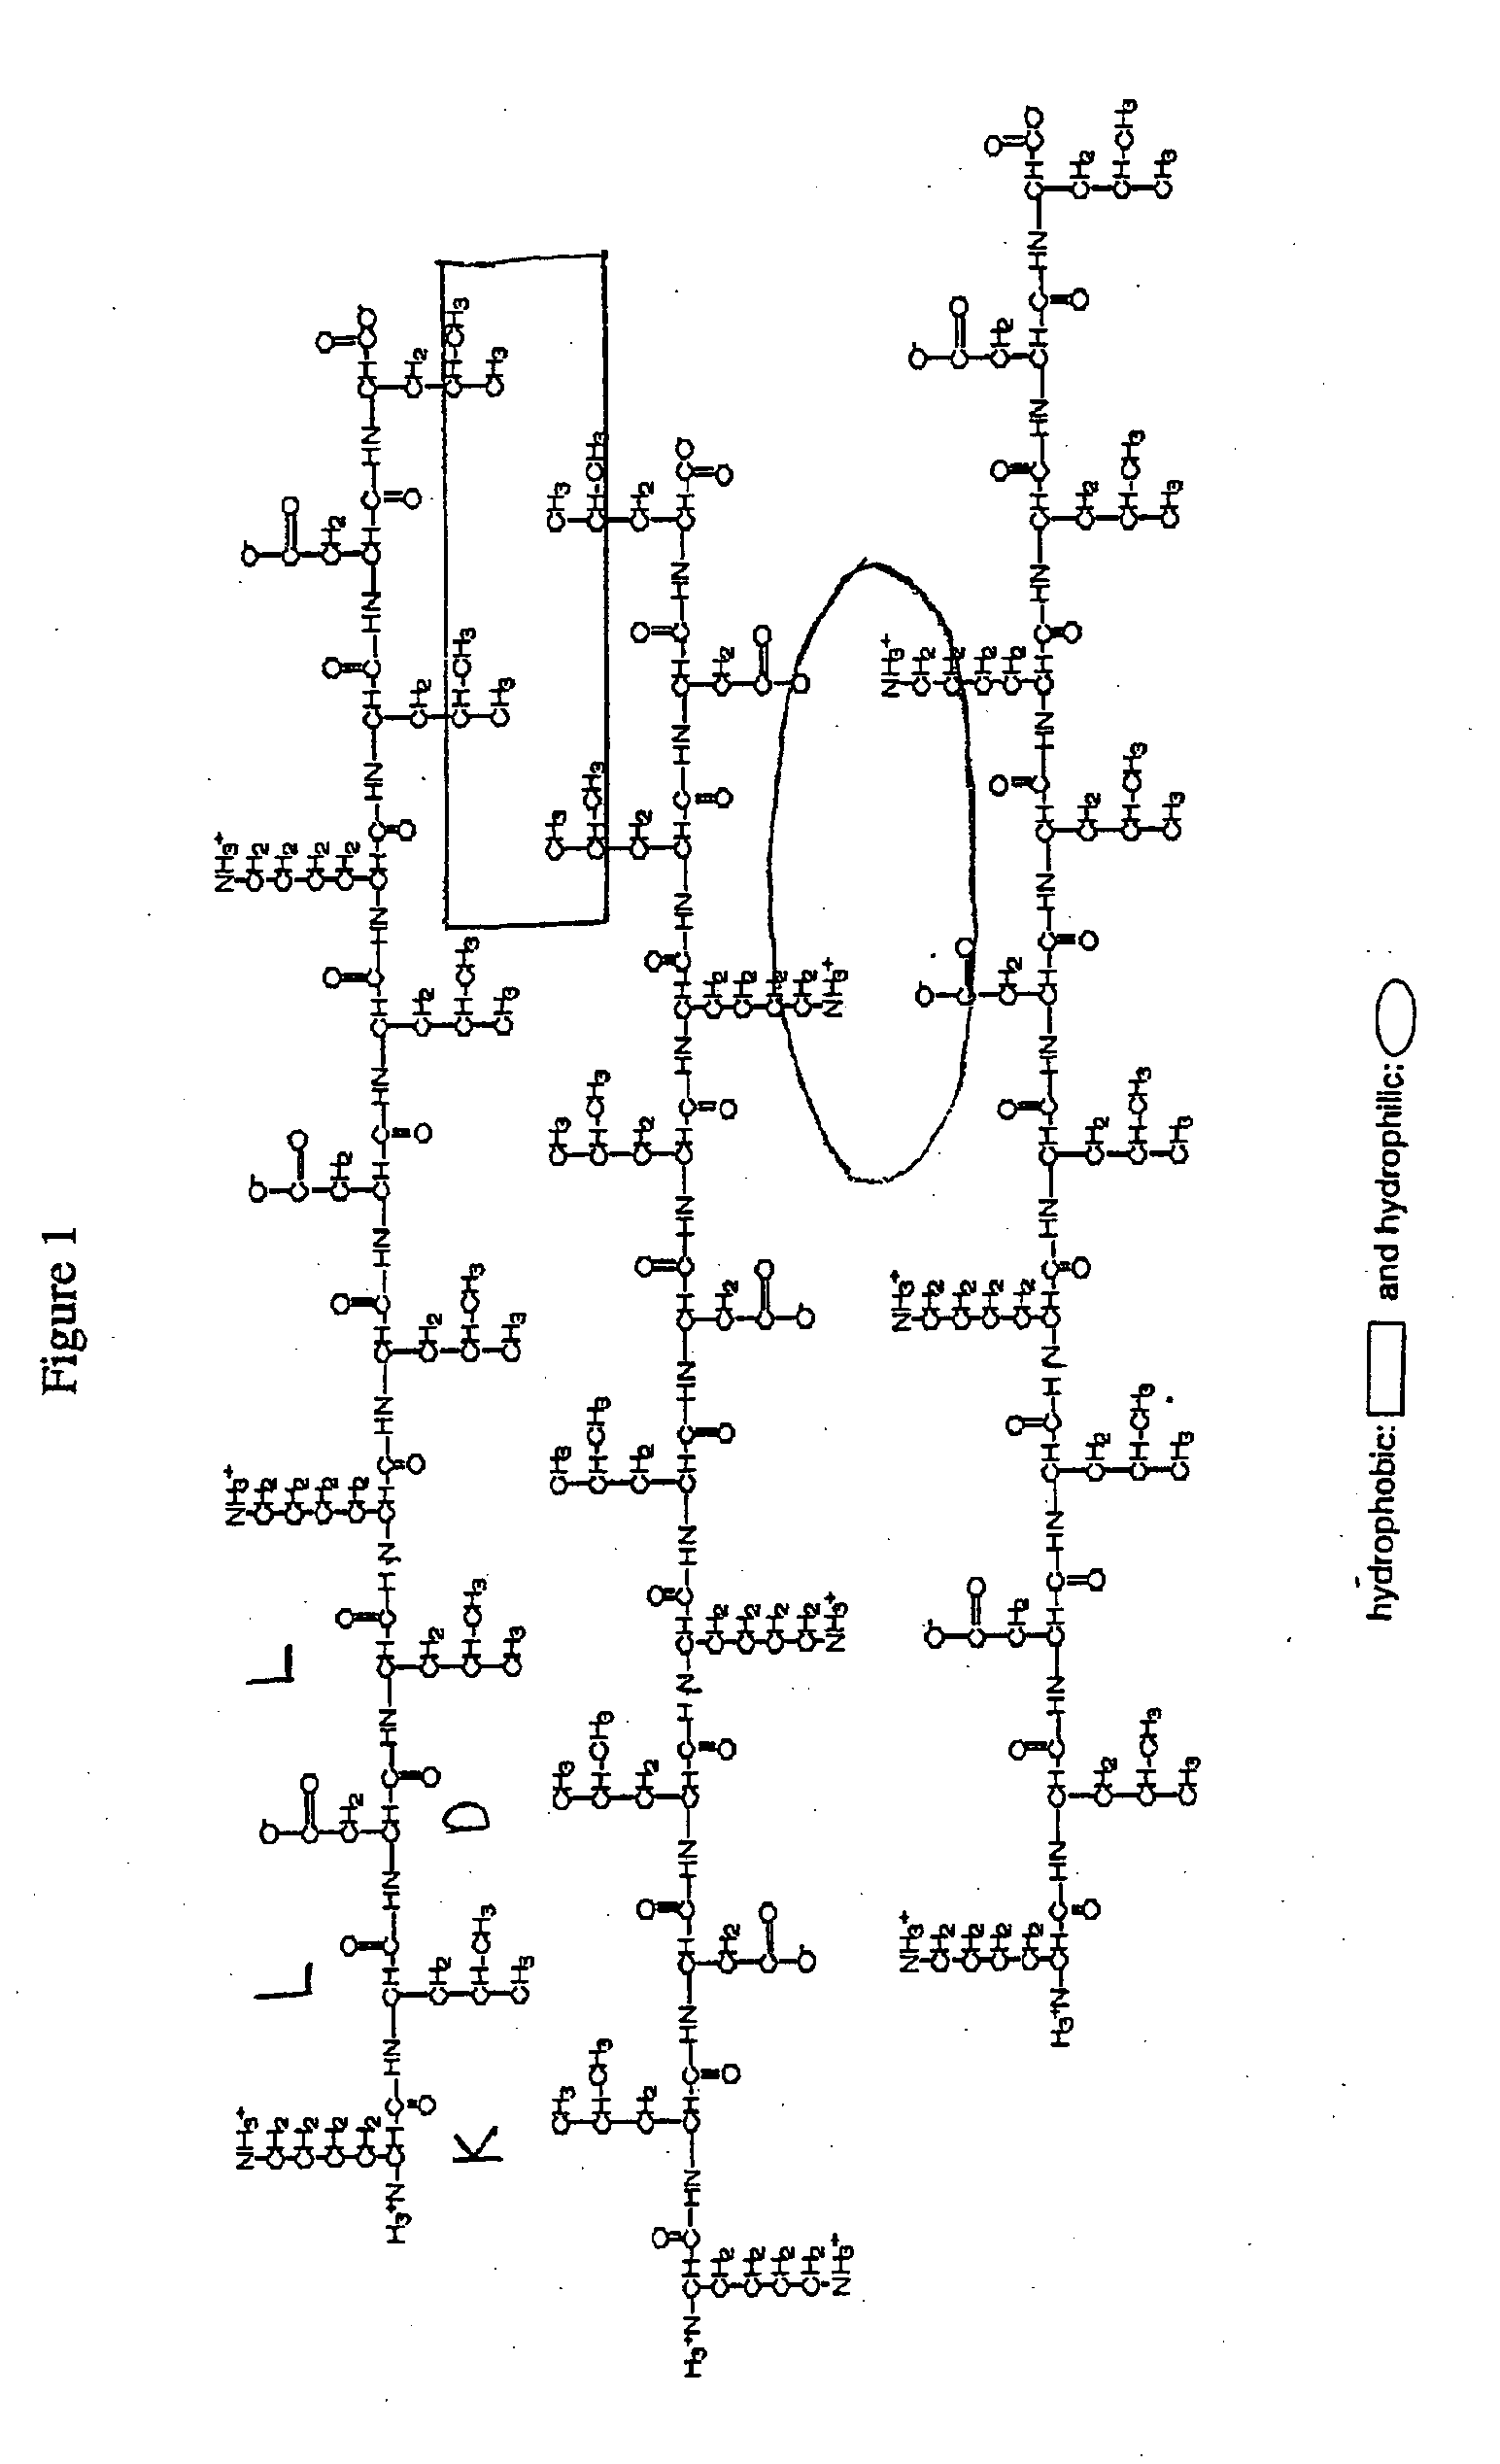 Purified Amphiphilic Peptide Compositions and Uses Thereof